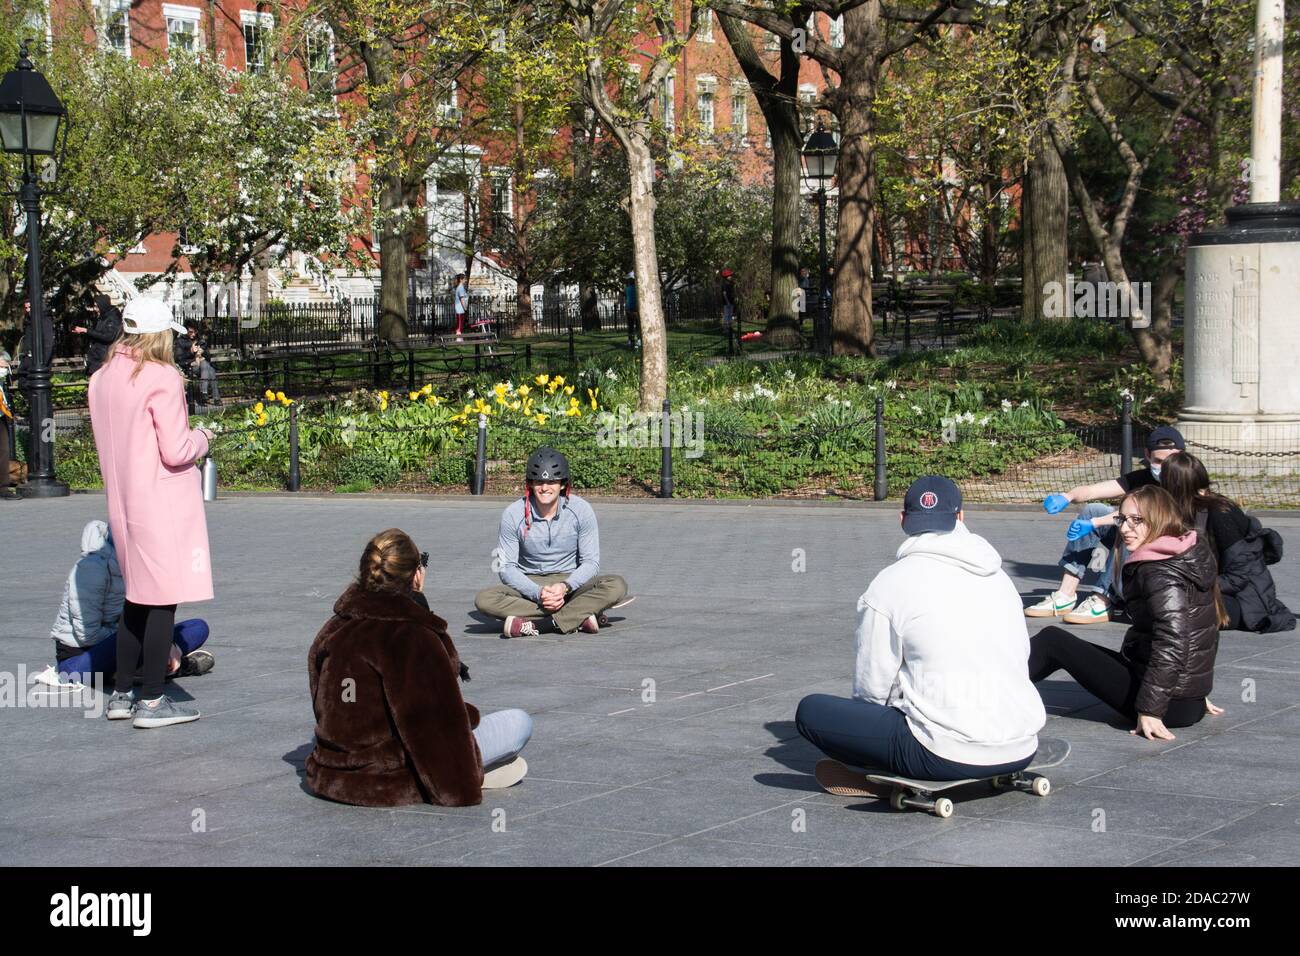 A group of Friends in NYC Park Social Distancing in a Circle Together During Covid-19 Lockdown Stock Photo